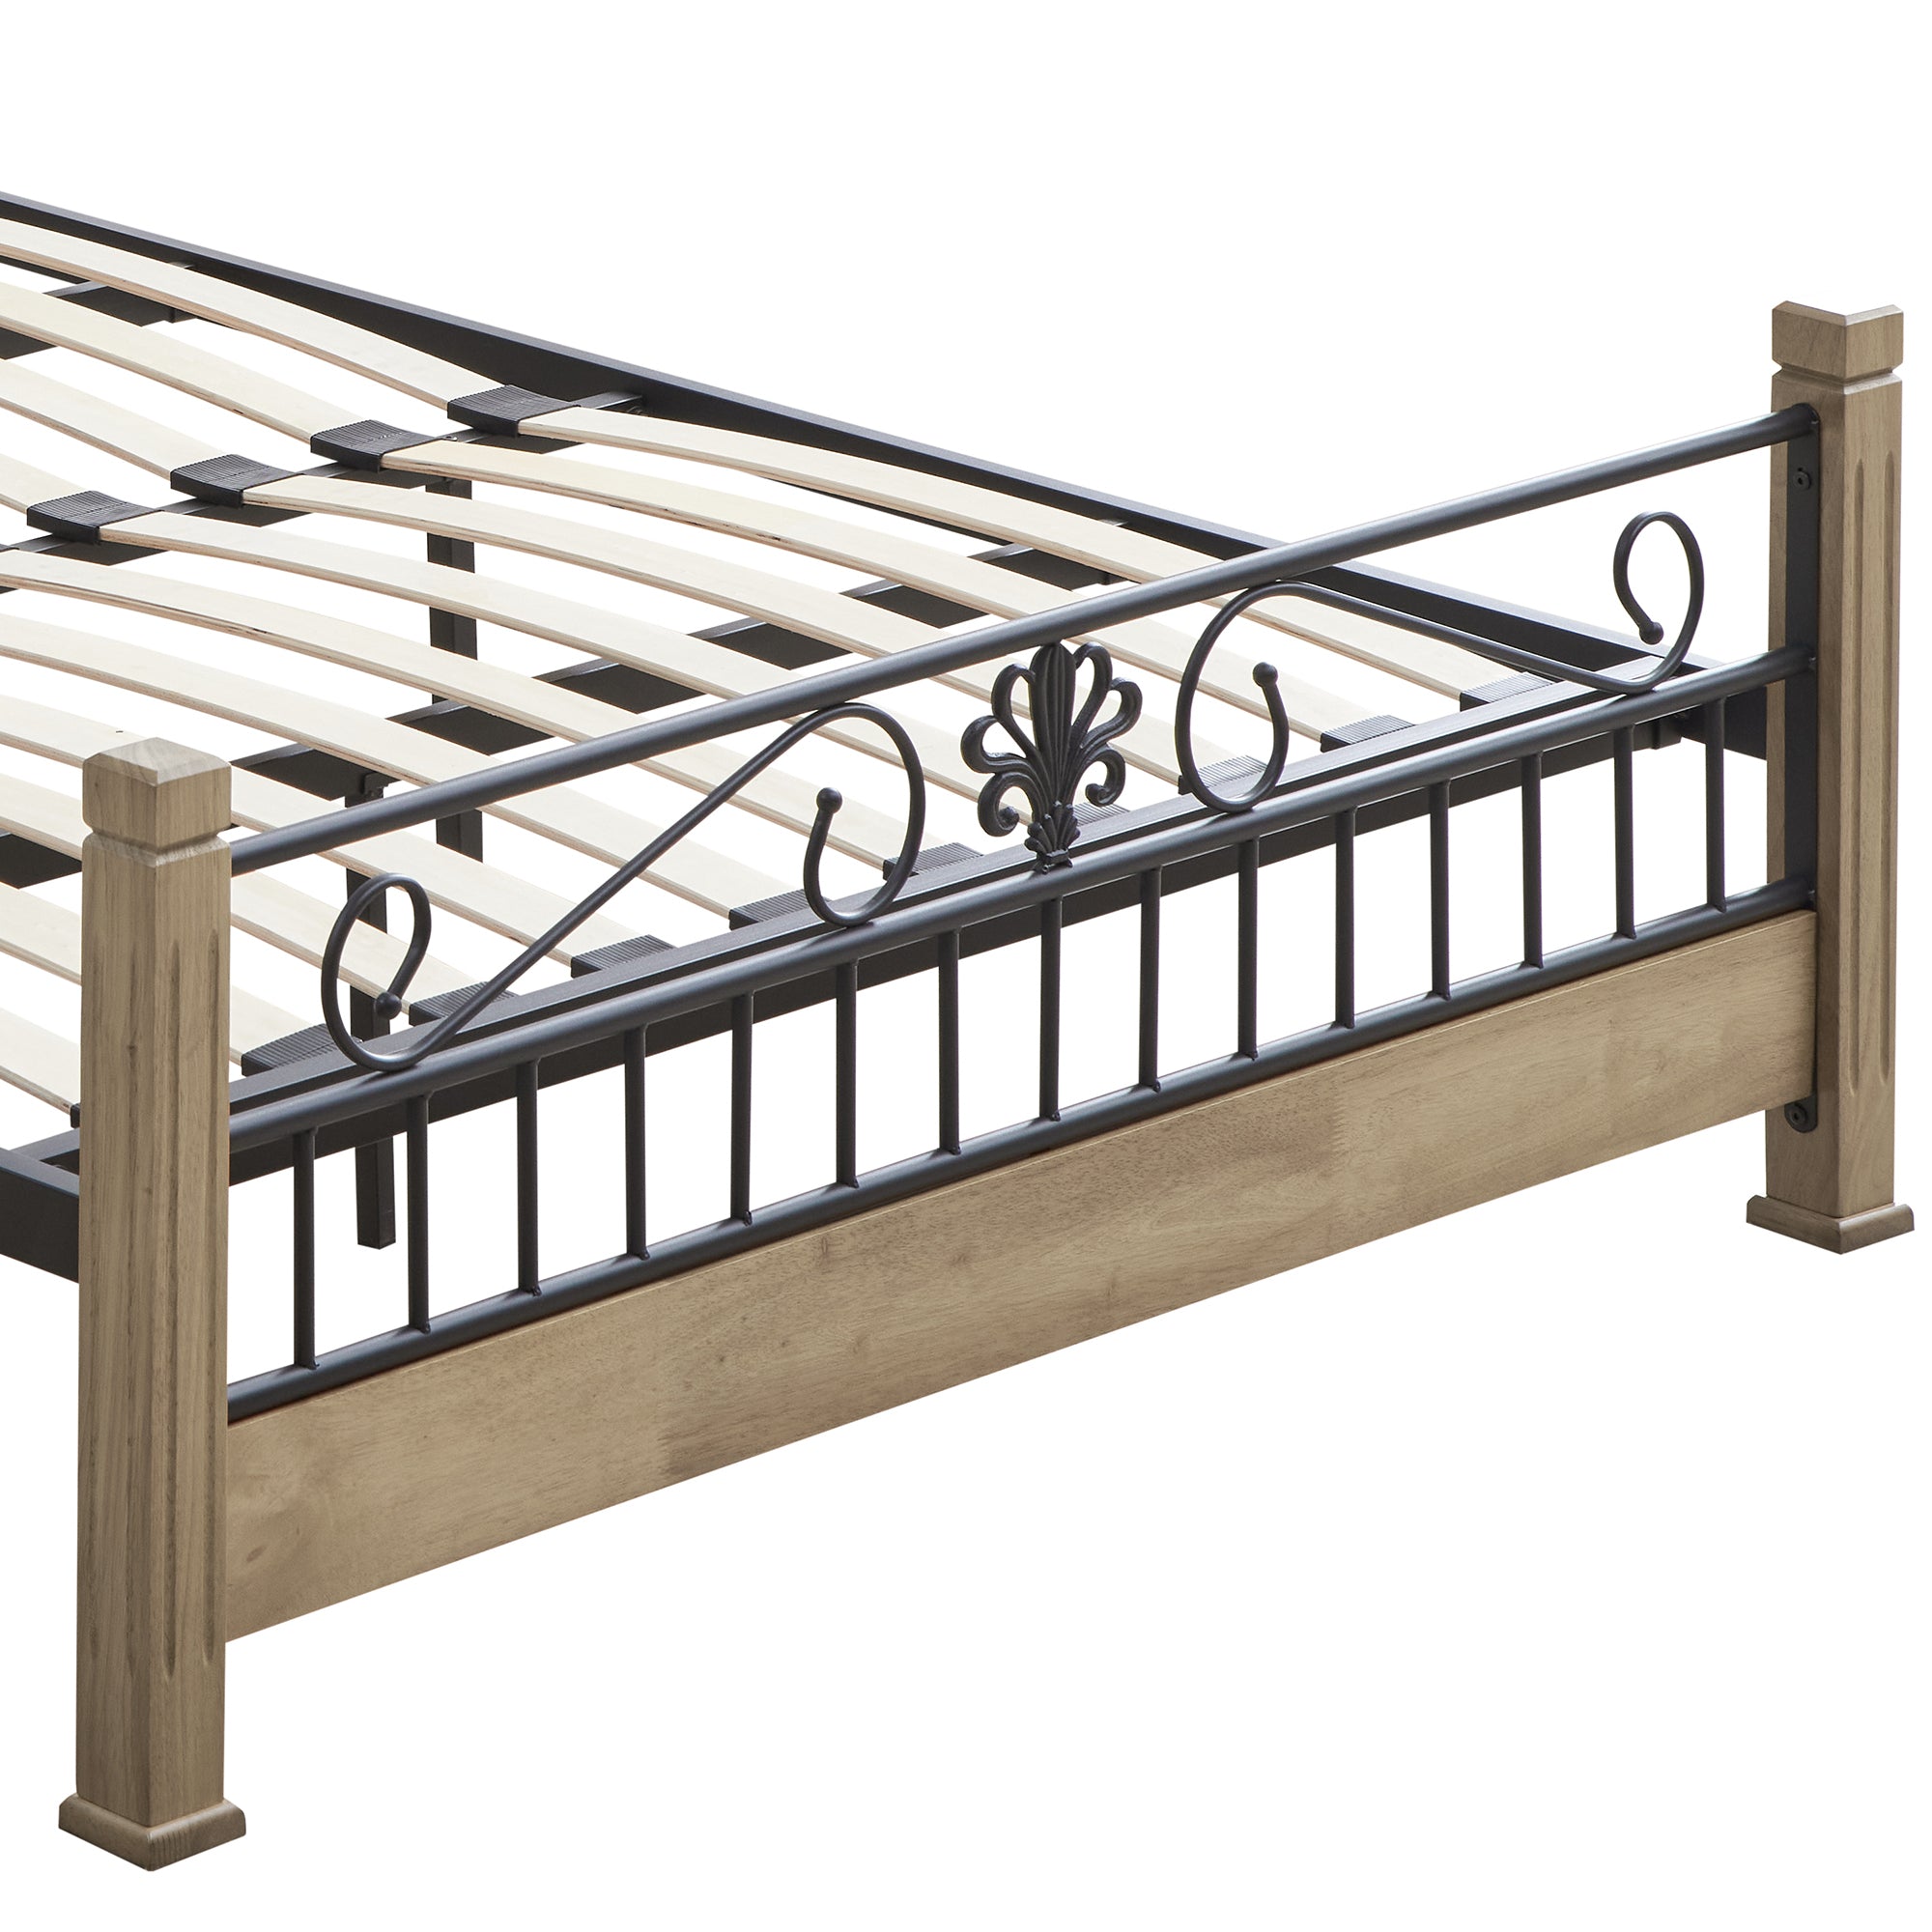 Christine Wood & Metal Bed Frame - Maple and Black